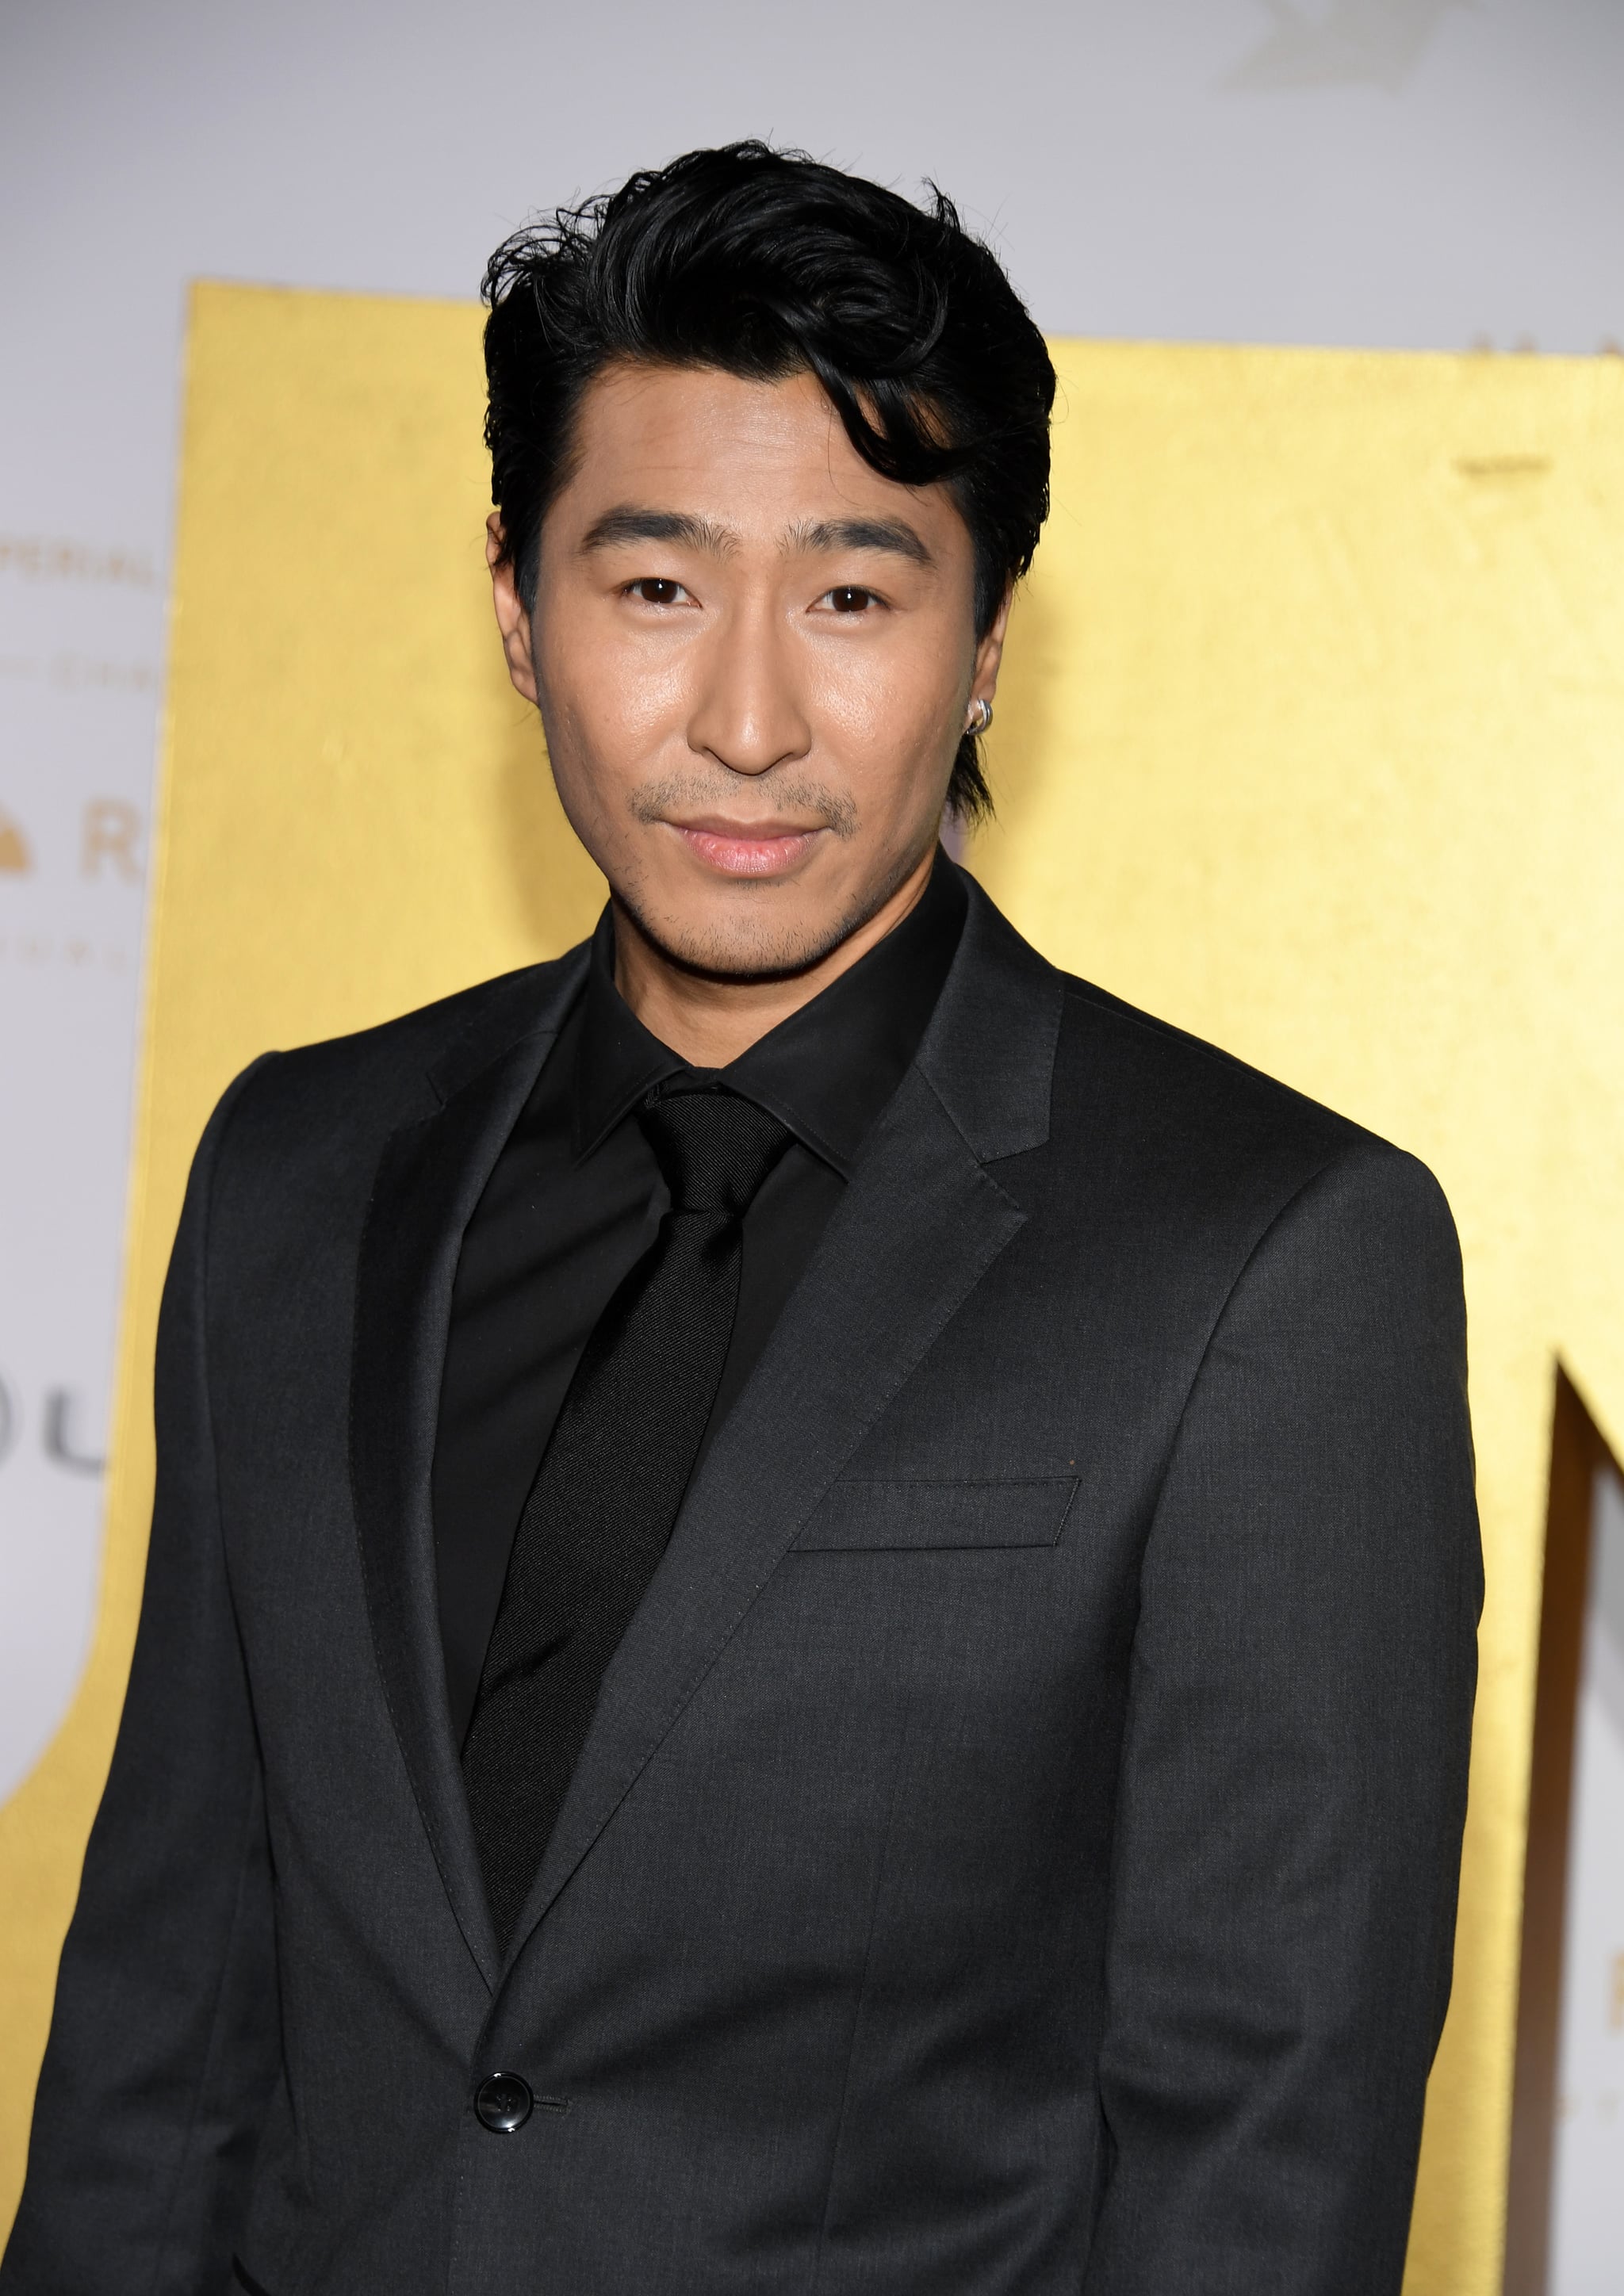 BEVERLY HILLS, CALIFORNIA - DECEMBER 11: Chris Pang attends the 19th Annual Unforgettable Gala at The Beverly Hilton on December 11, 2021 in Beverly Hills, California. (Photo by Jon Kopaloff/FilmMagic)